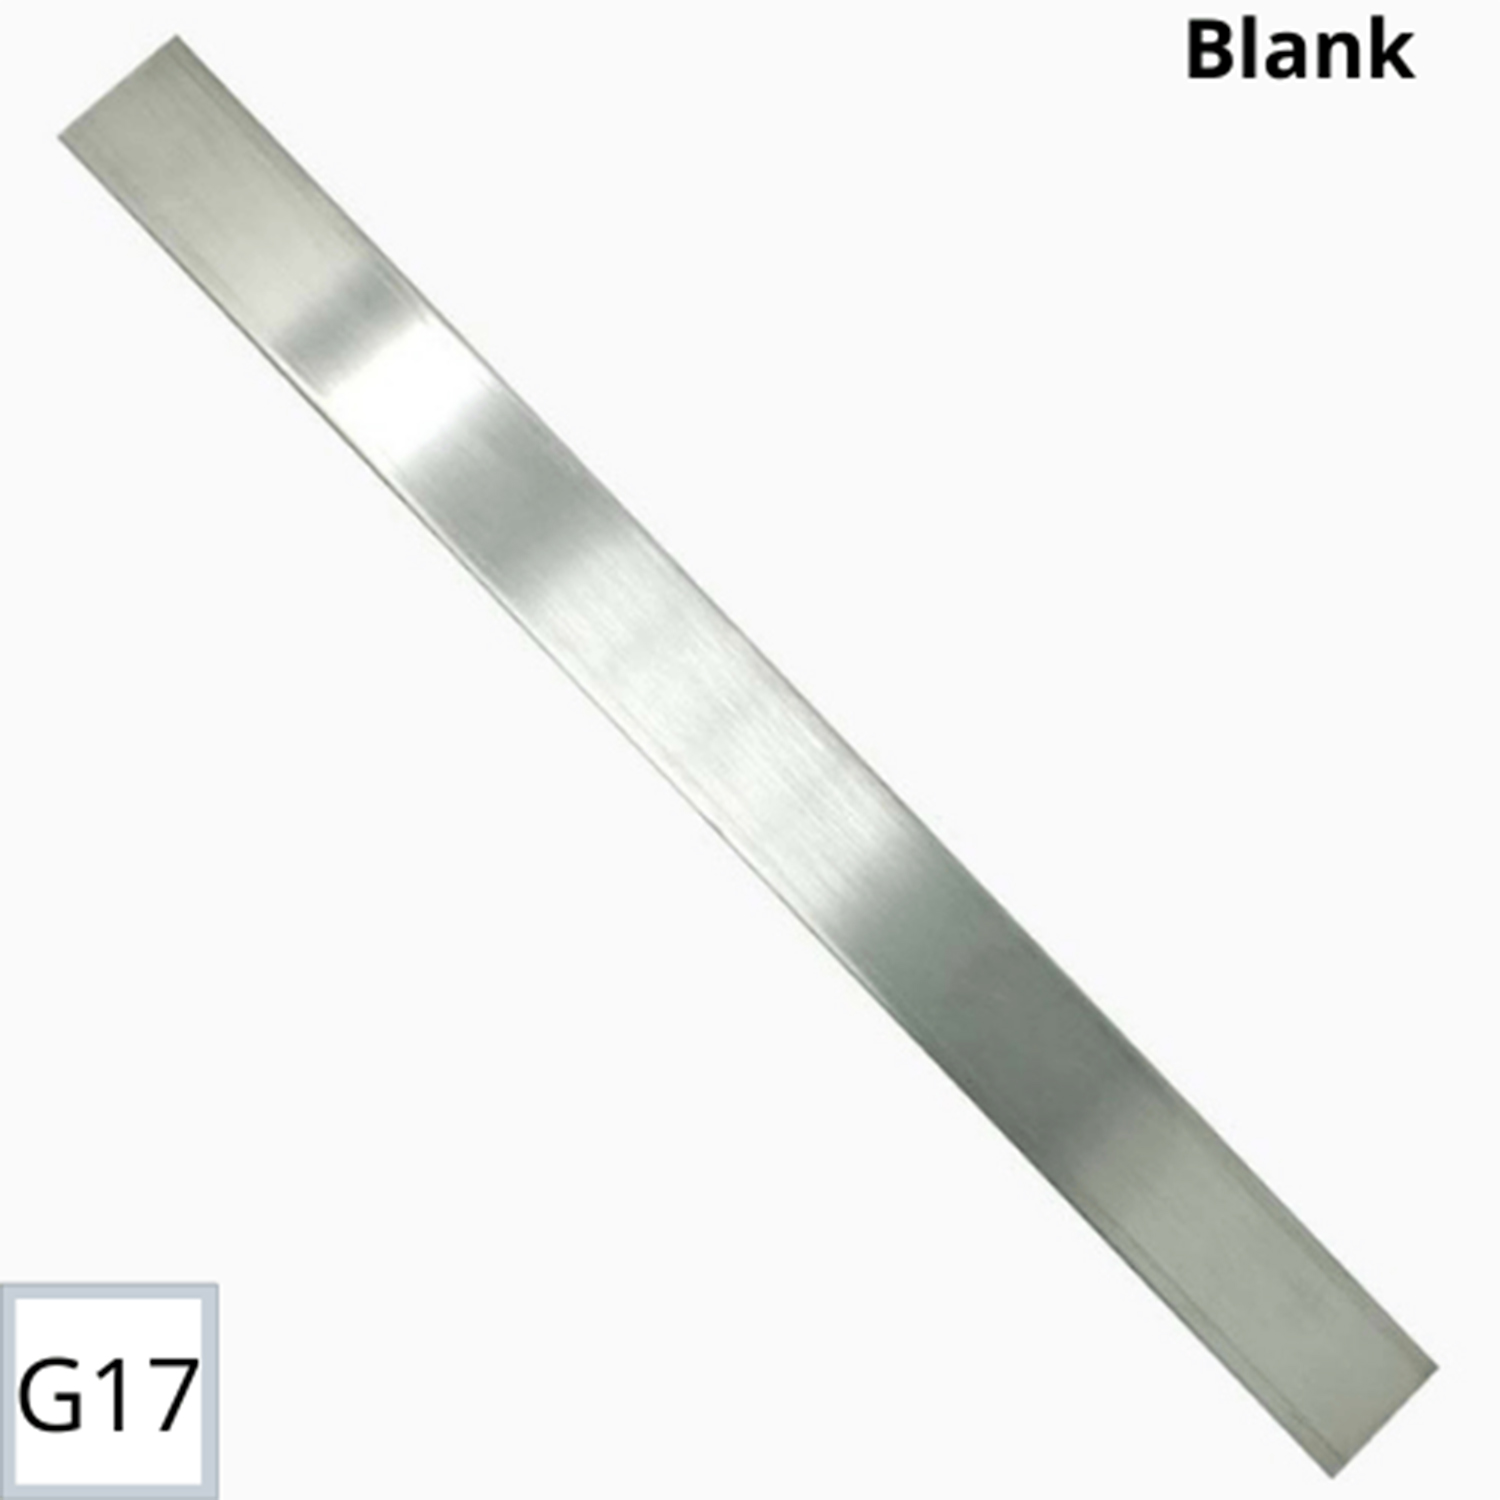 36" Linear Drain with Blue Membrane - G17 - IB TOOLS